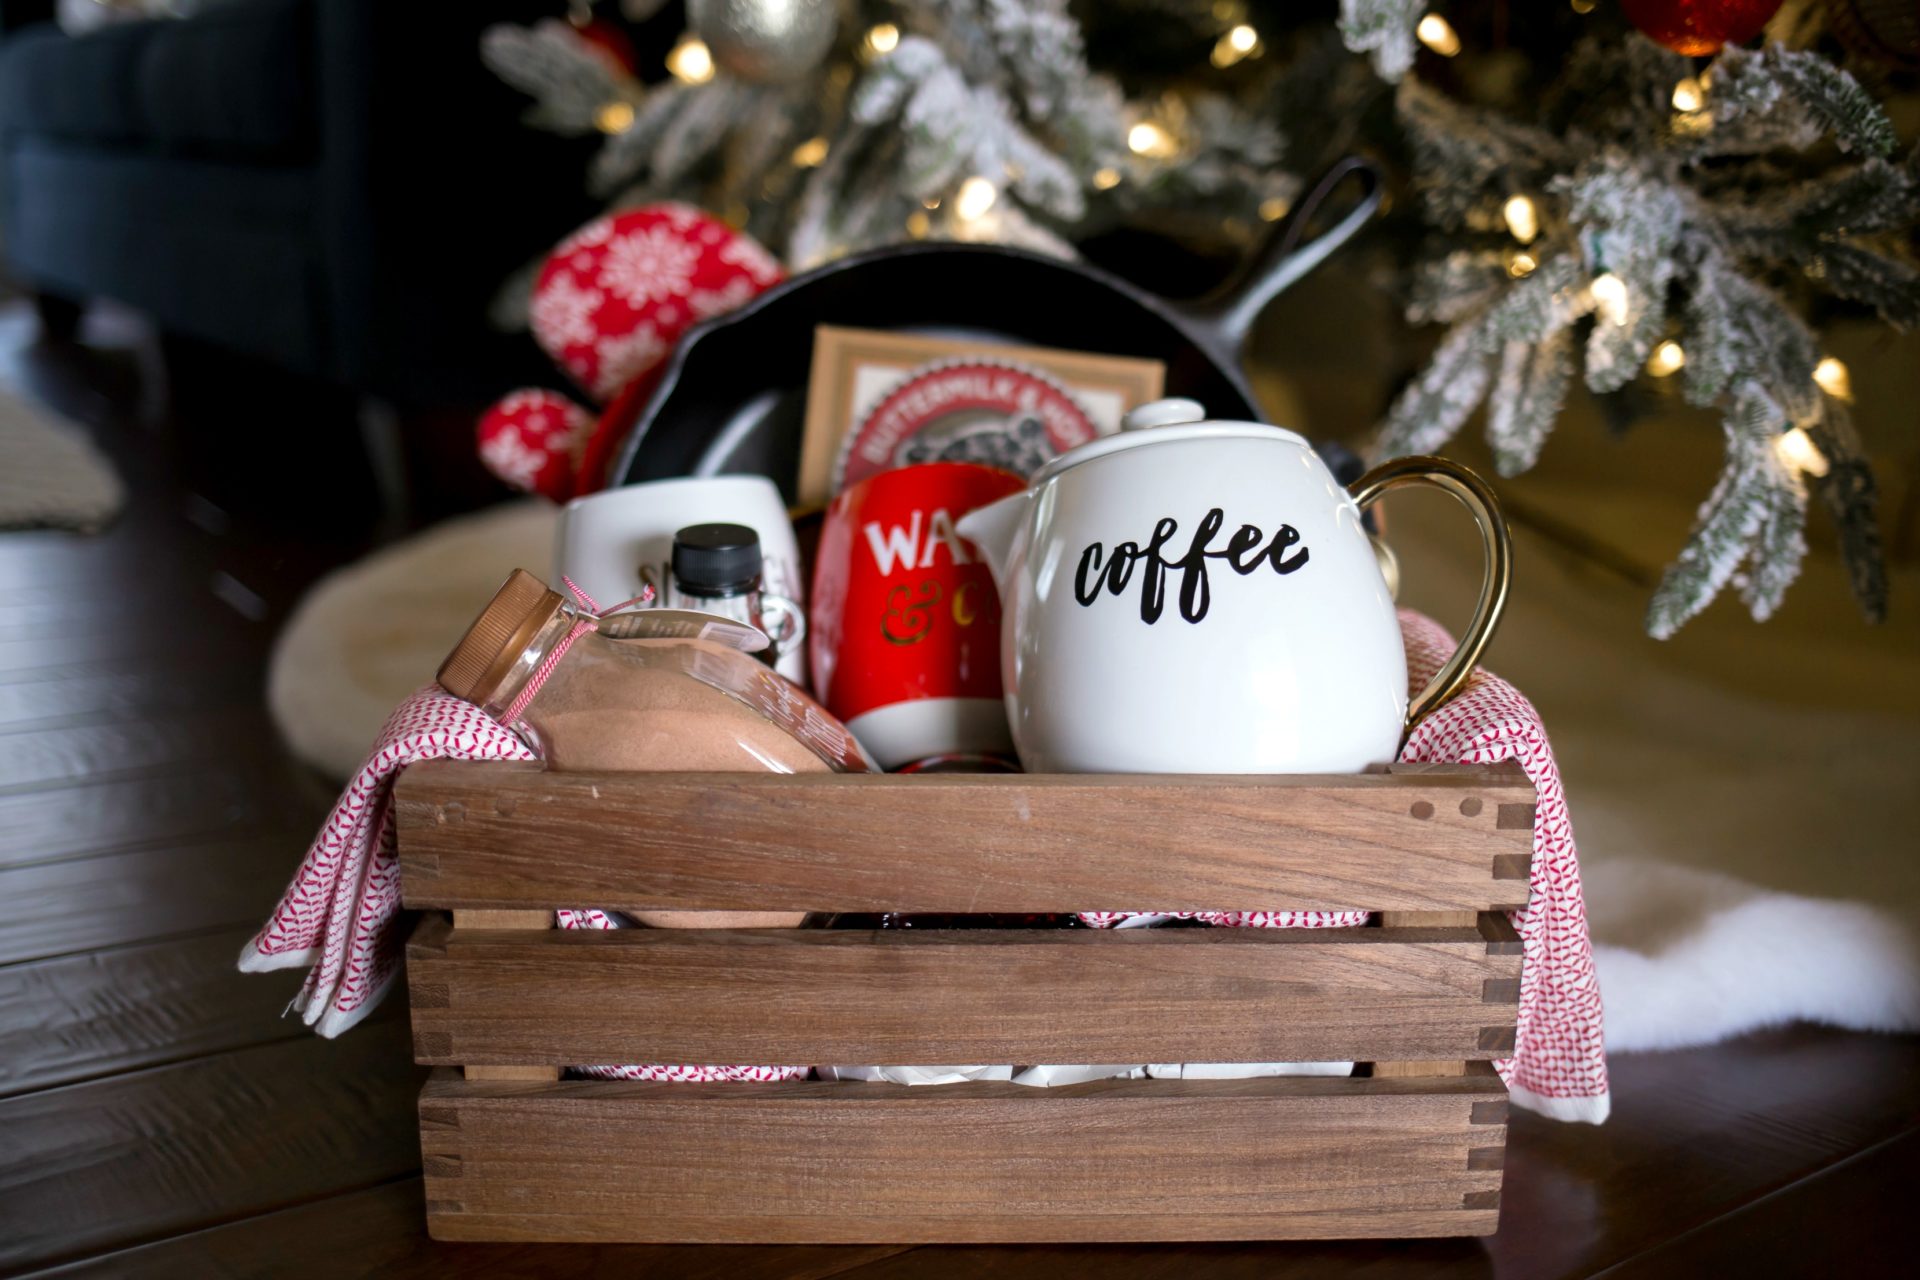 gift baskets & hostess gifts // 6 thoughtful gift ideas that are